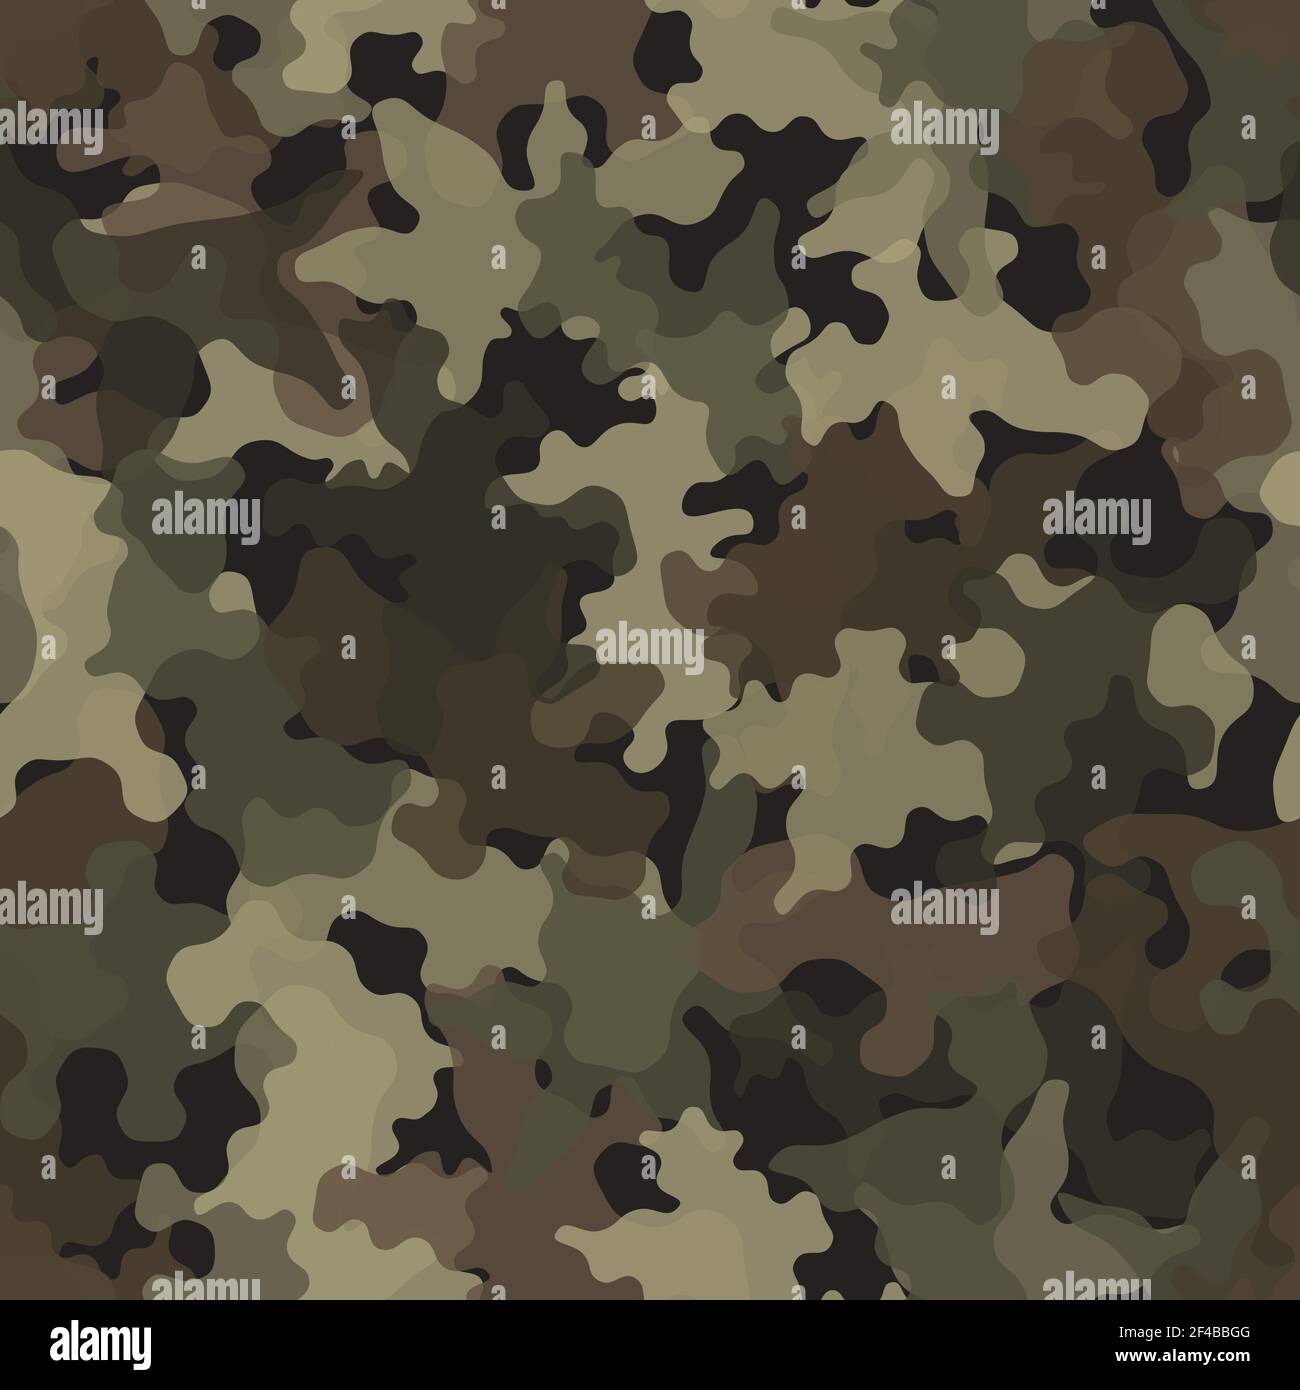 Camouflage seamless pattern texture. Abstract vector military camo